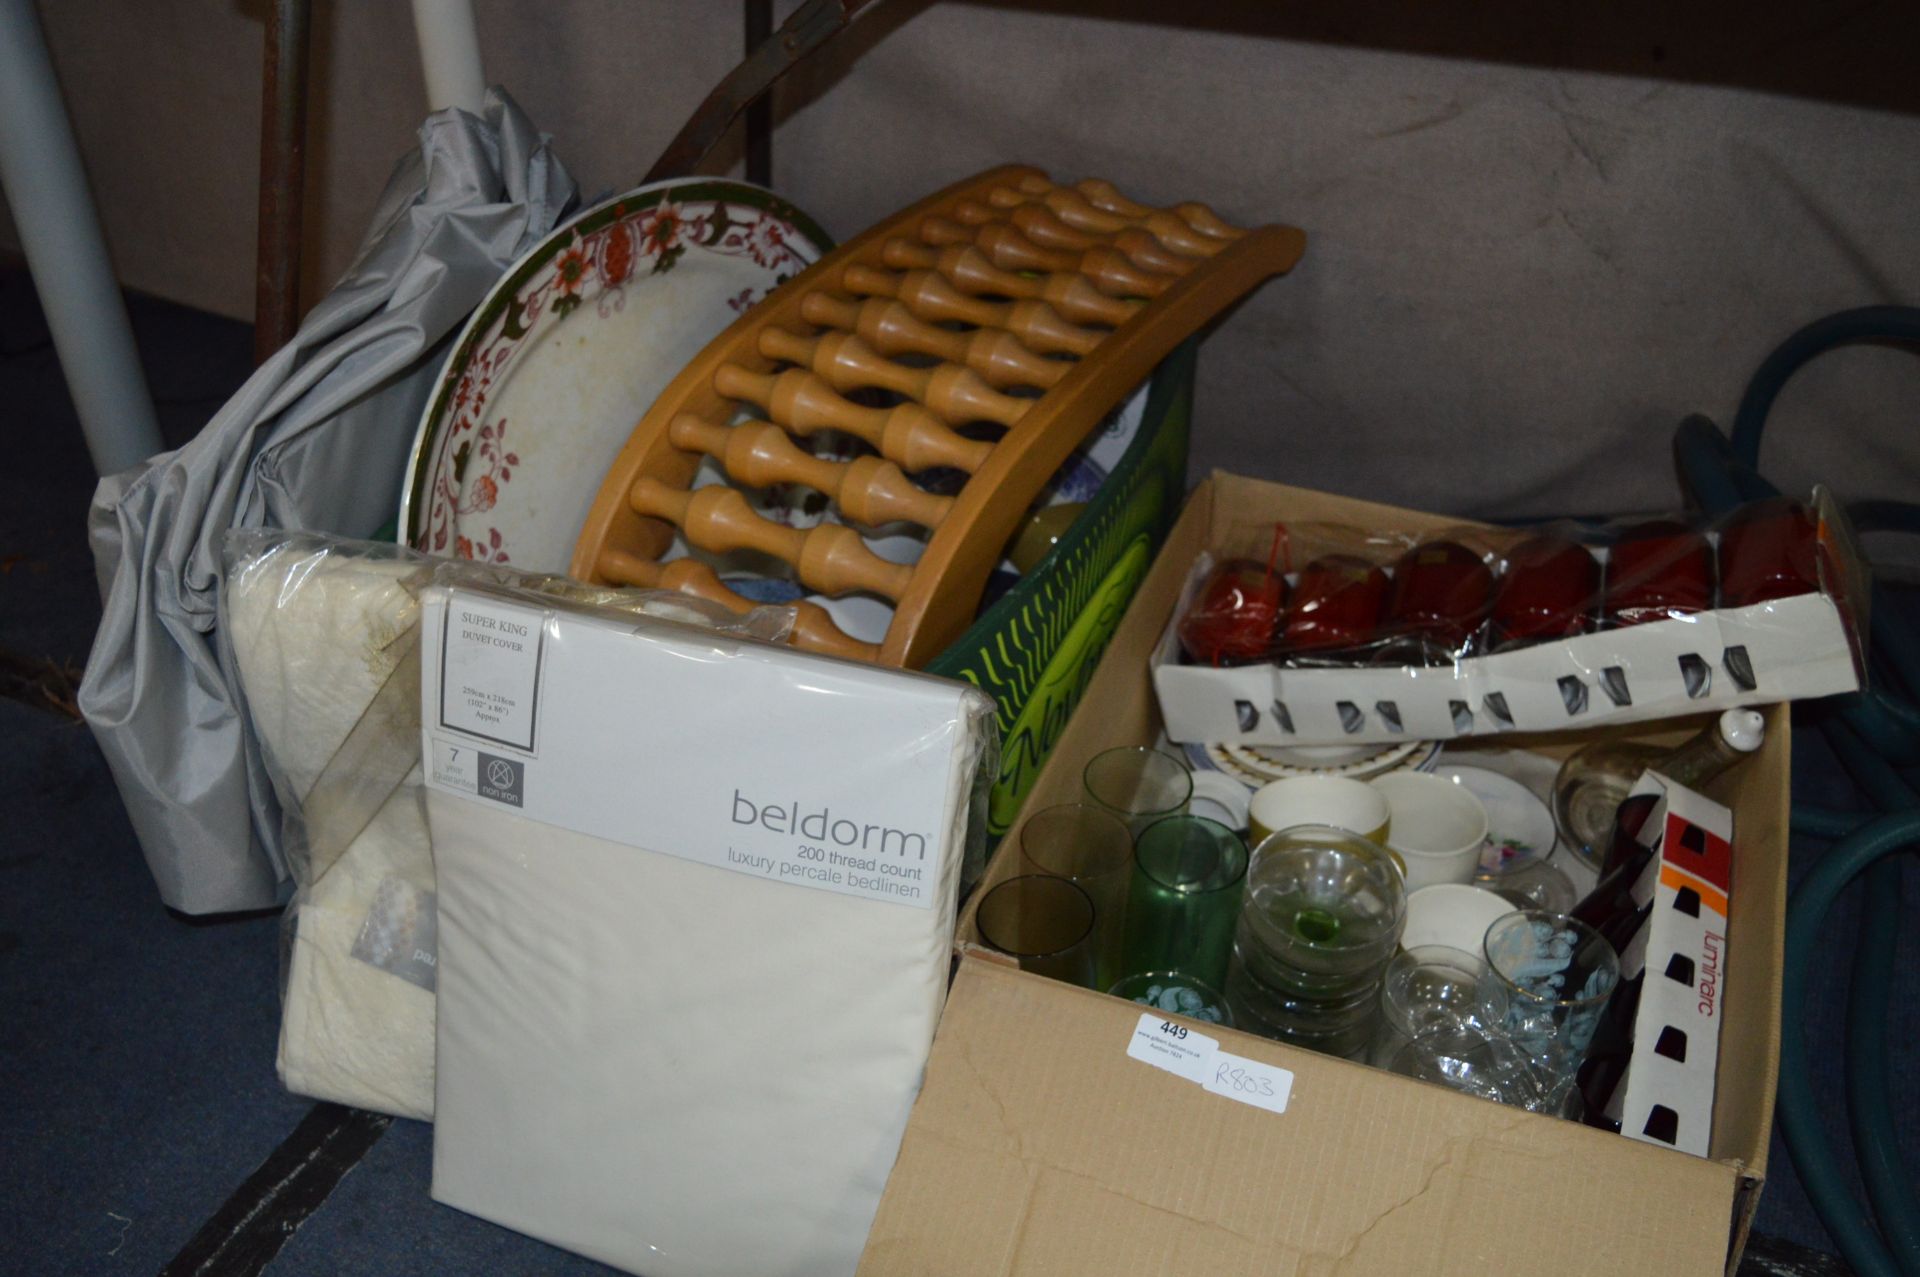 Two Boxes Containing Drinking Glassware, Mugs, Towel Set, Back Massager, Meat Plates, etc.